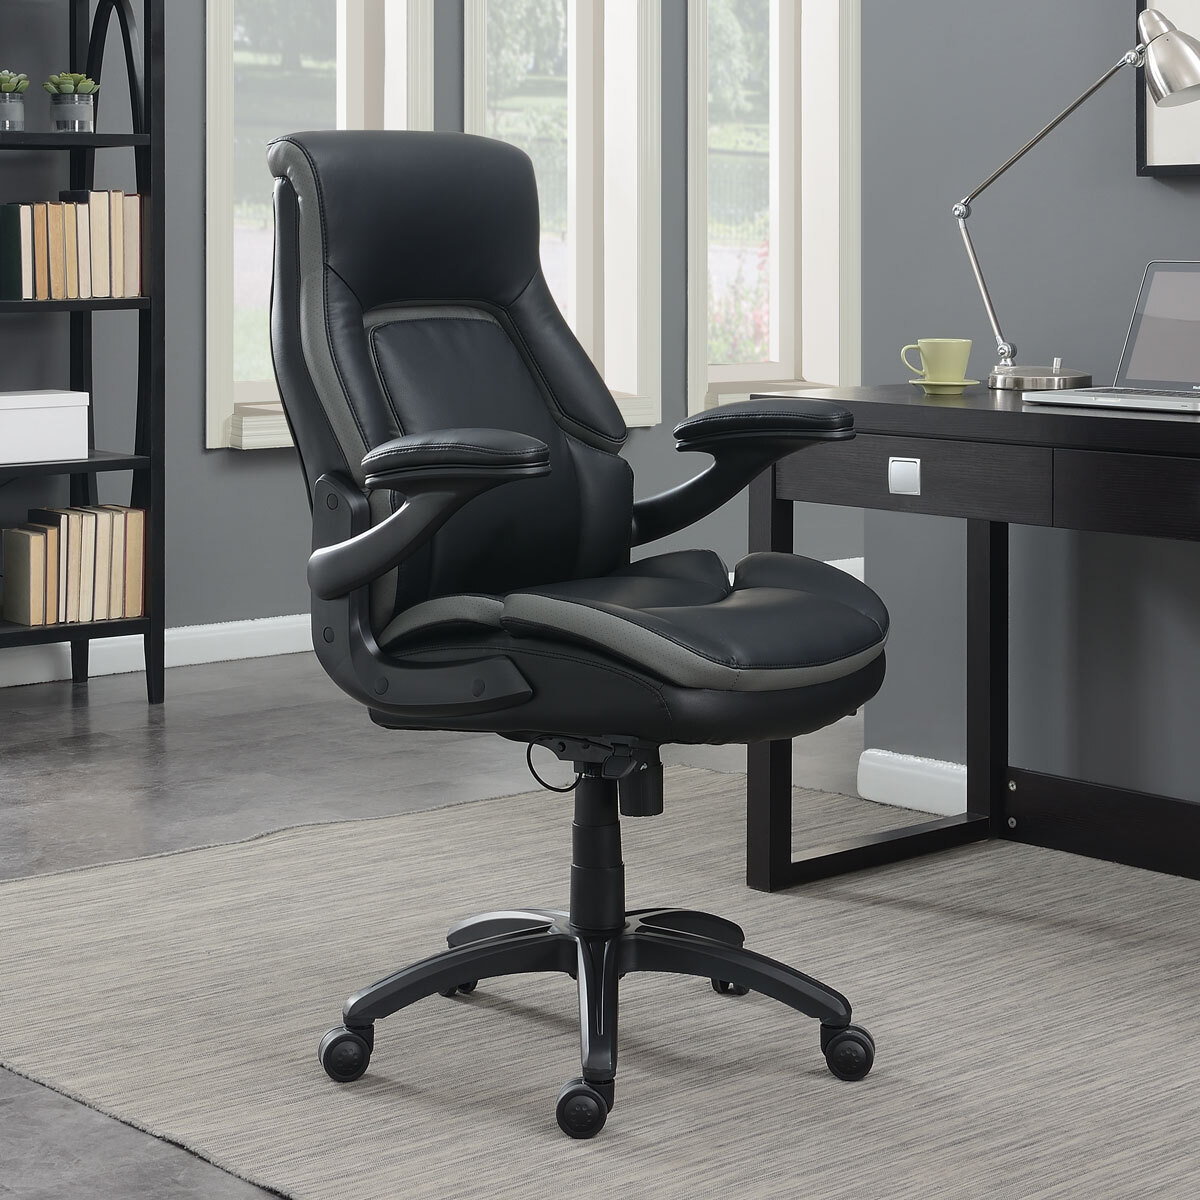 Costco Office Chair Lazy Boy : La Z Boy Browning Leather Executive Office Chair Costco Weekender